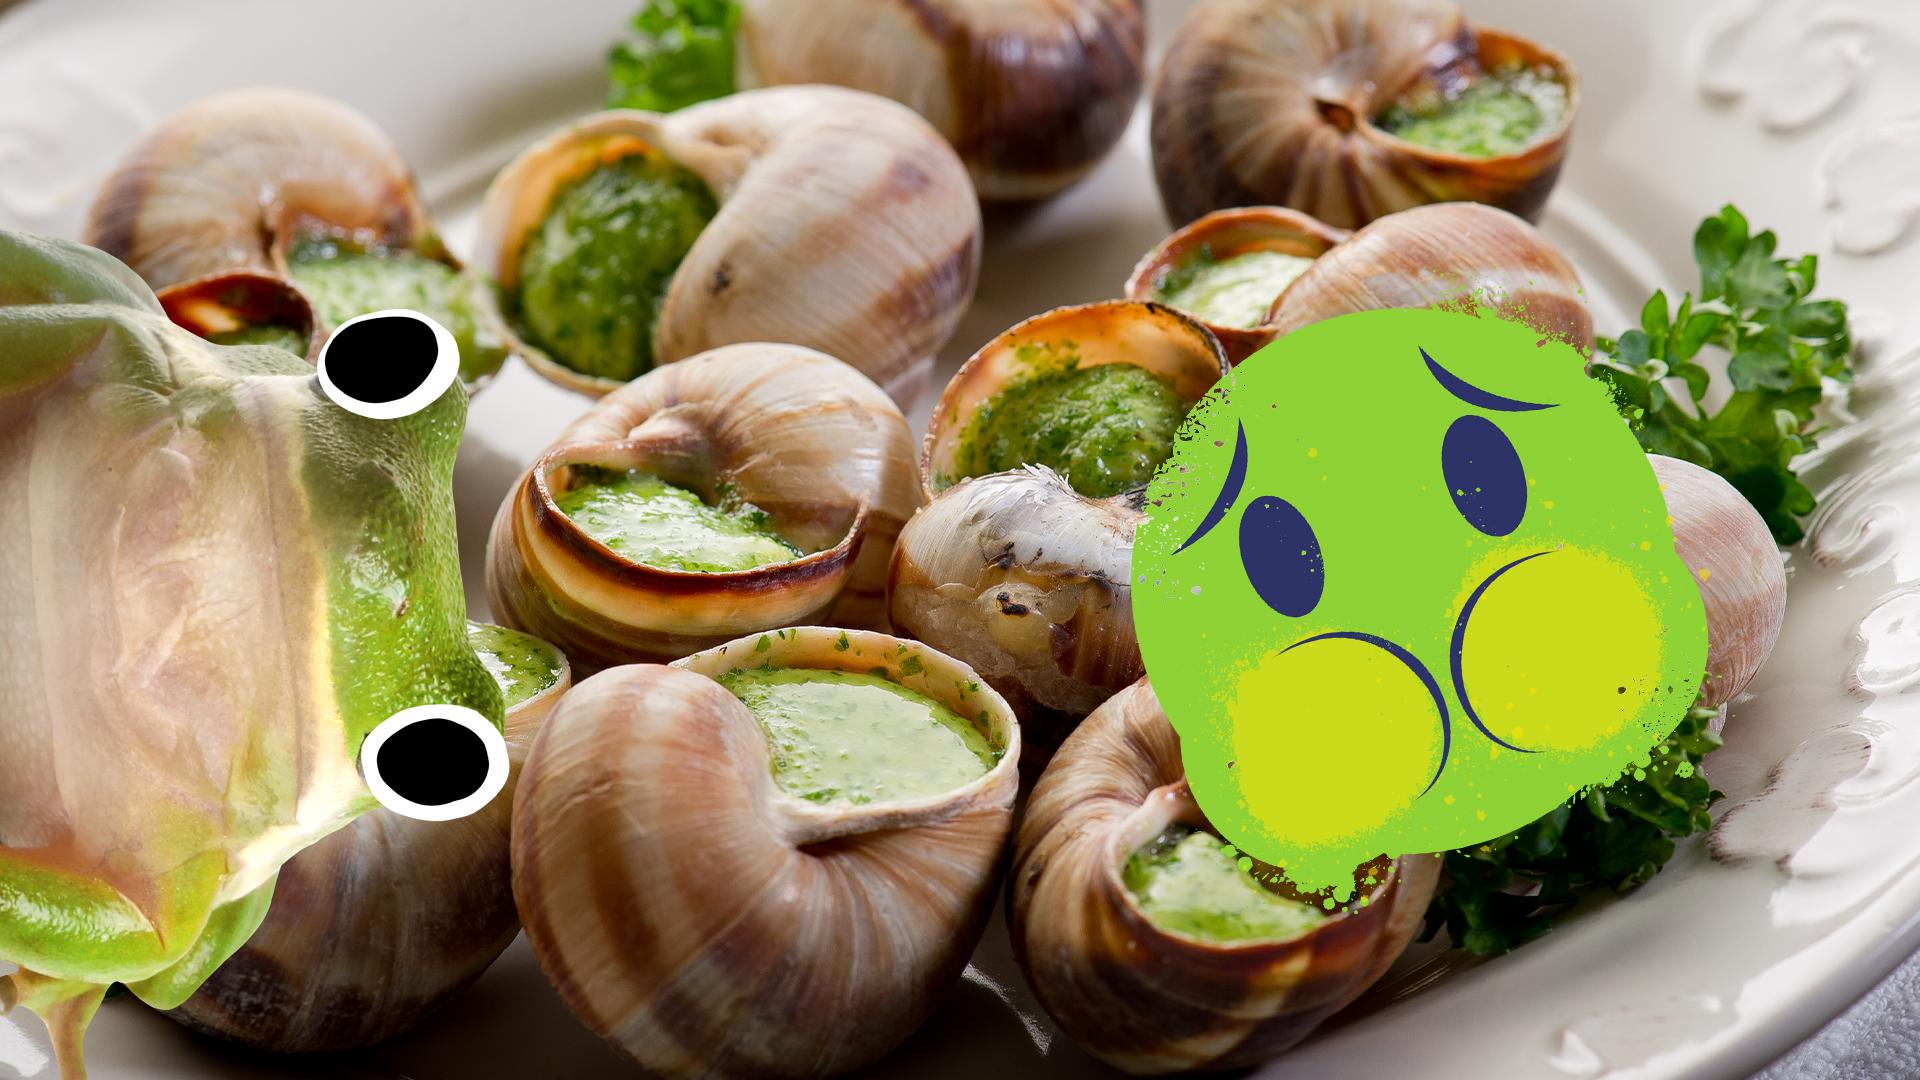 Snails on plate with sick emoji and Beano frog